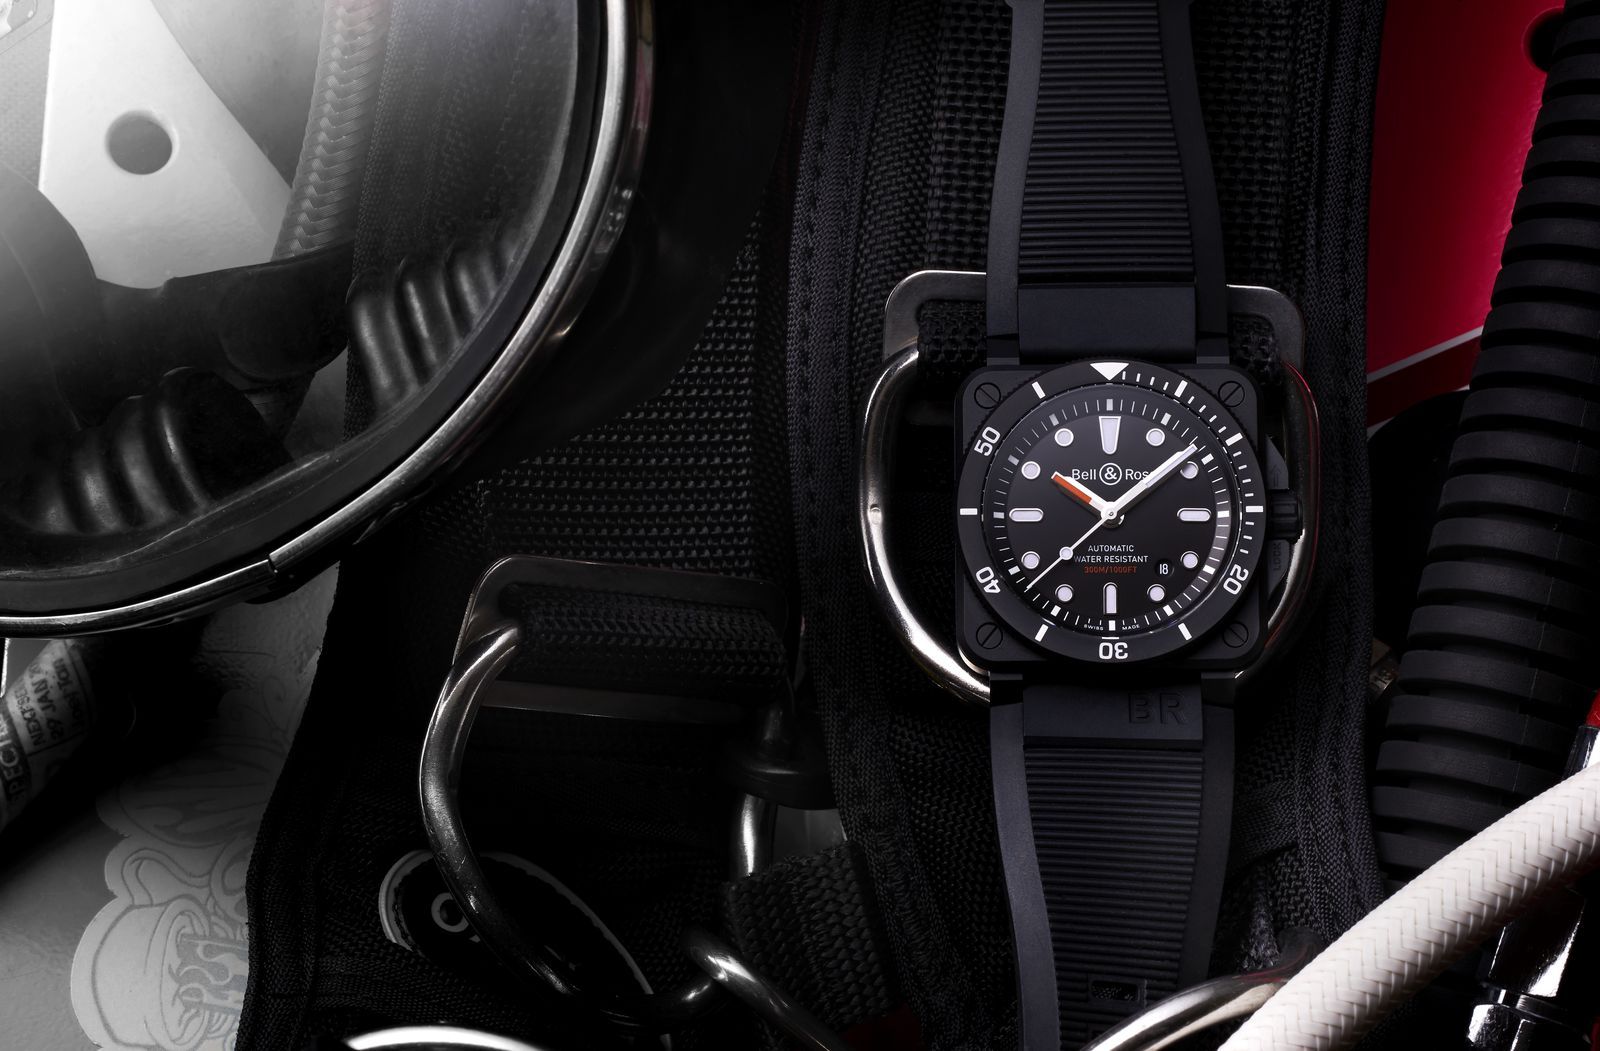 Bell & Ross’ new ceramic watch performs as well as it looks